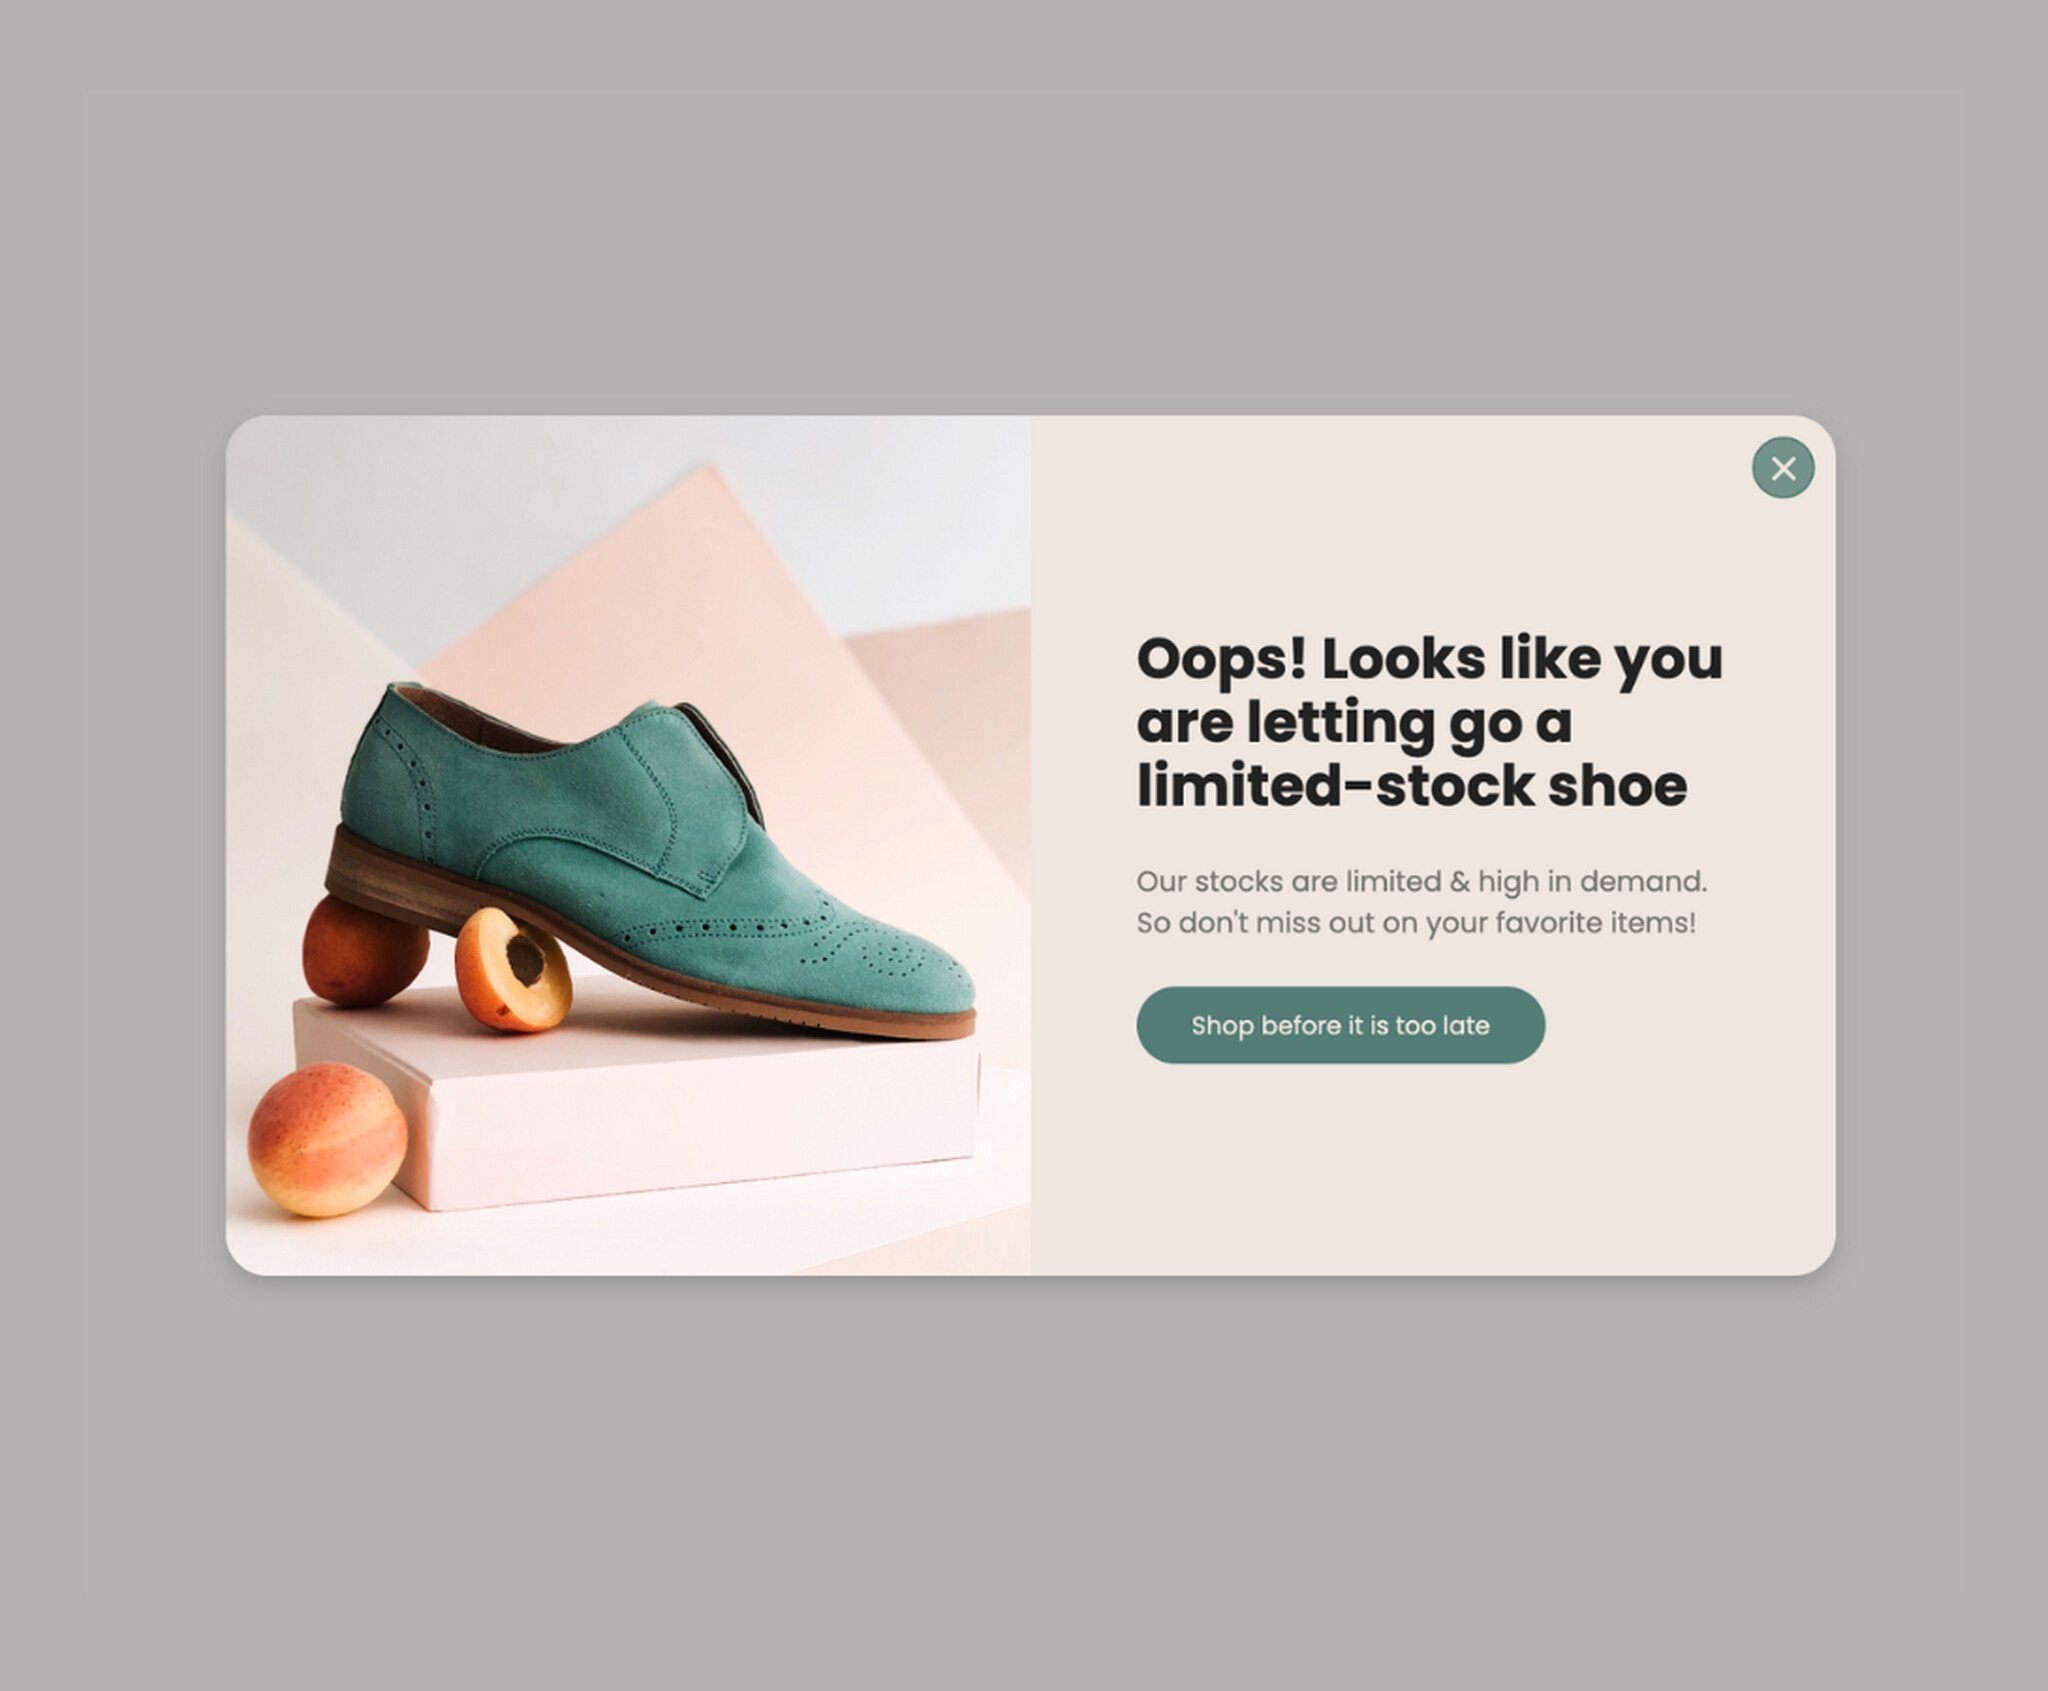 alt= "exit-intent-triggered-popup-example that says Oops! It looks like you are letting go of a limited-stock shoe with a shoe photo"